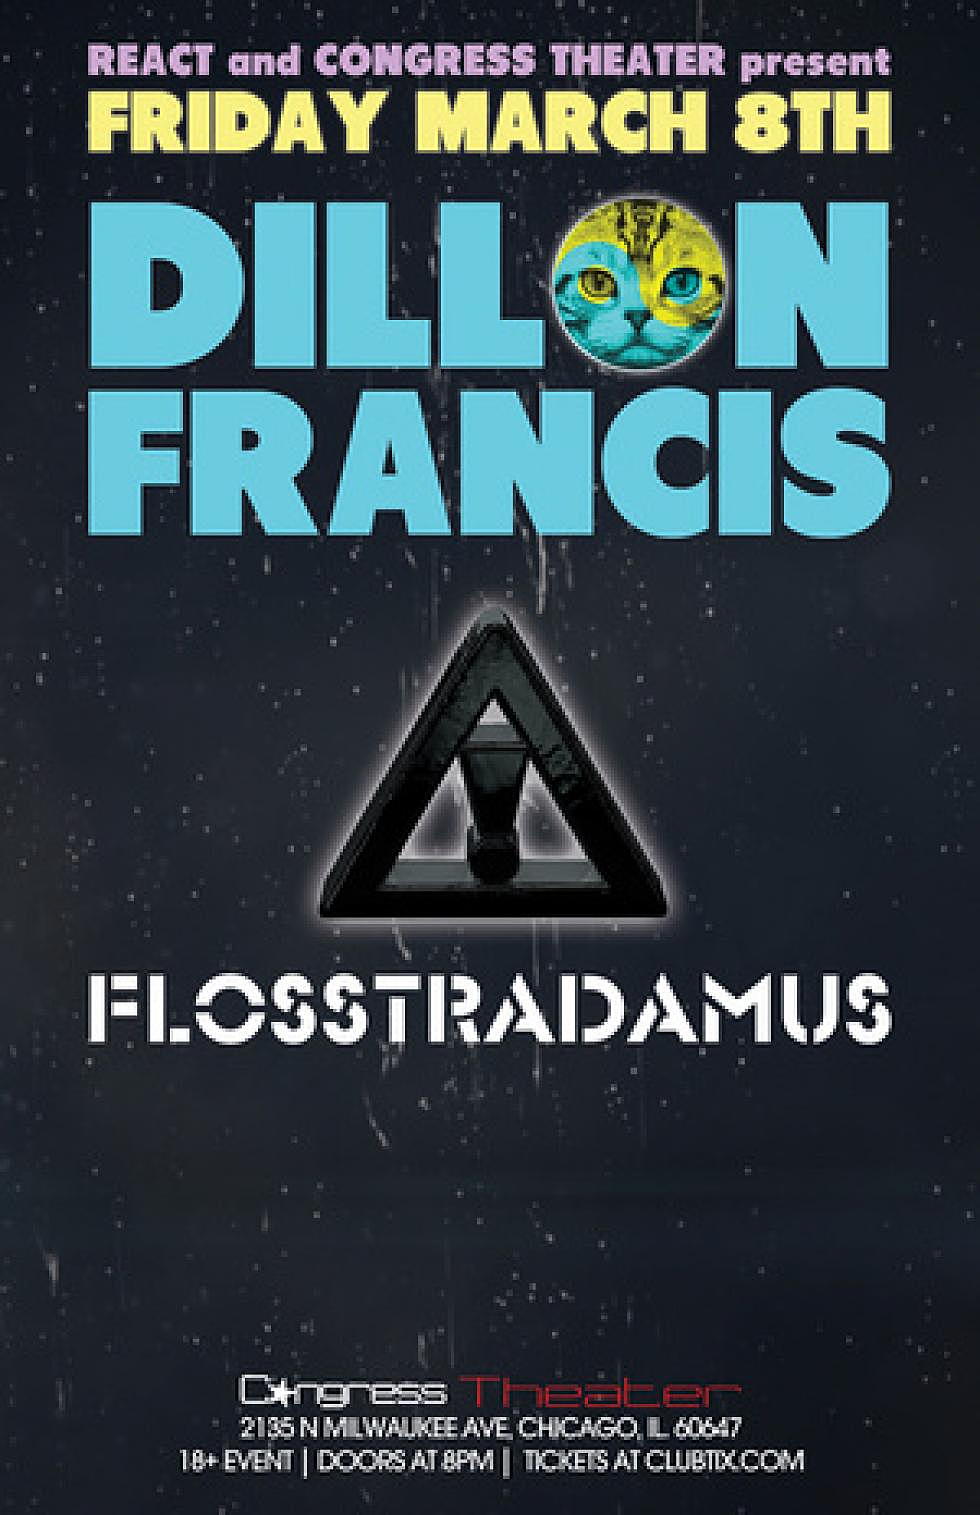 Dillon Francis&#8217; &#8220;Wurld Turr&#8221; with Flosstradamus at Congress Theater March 8th